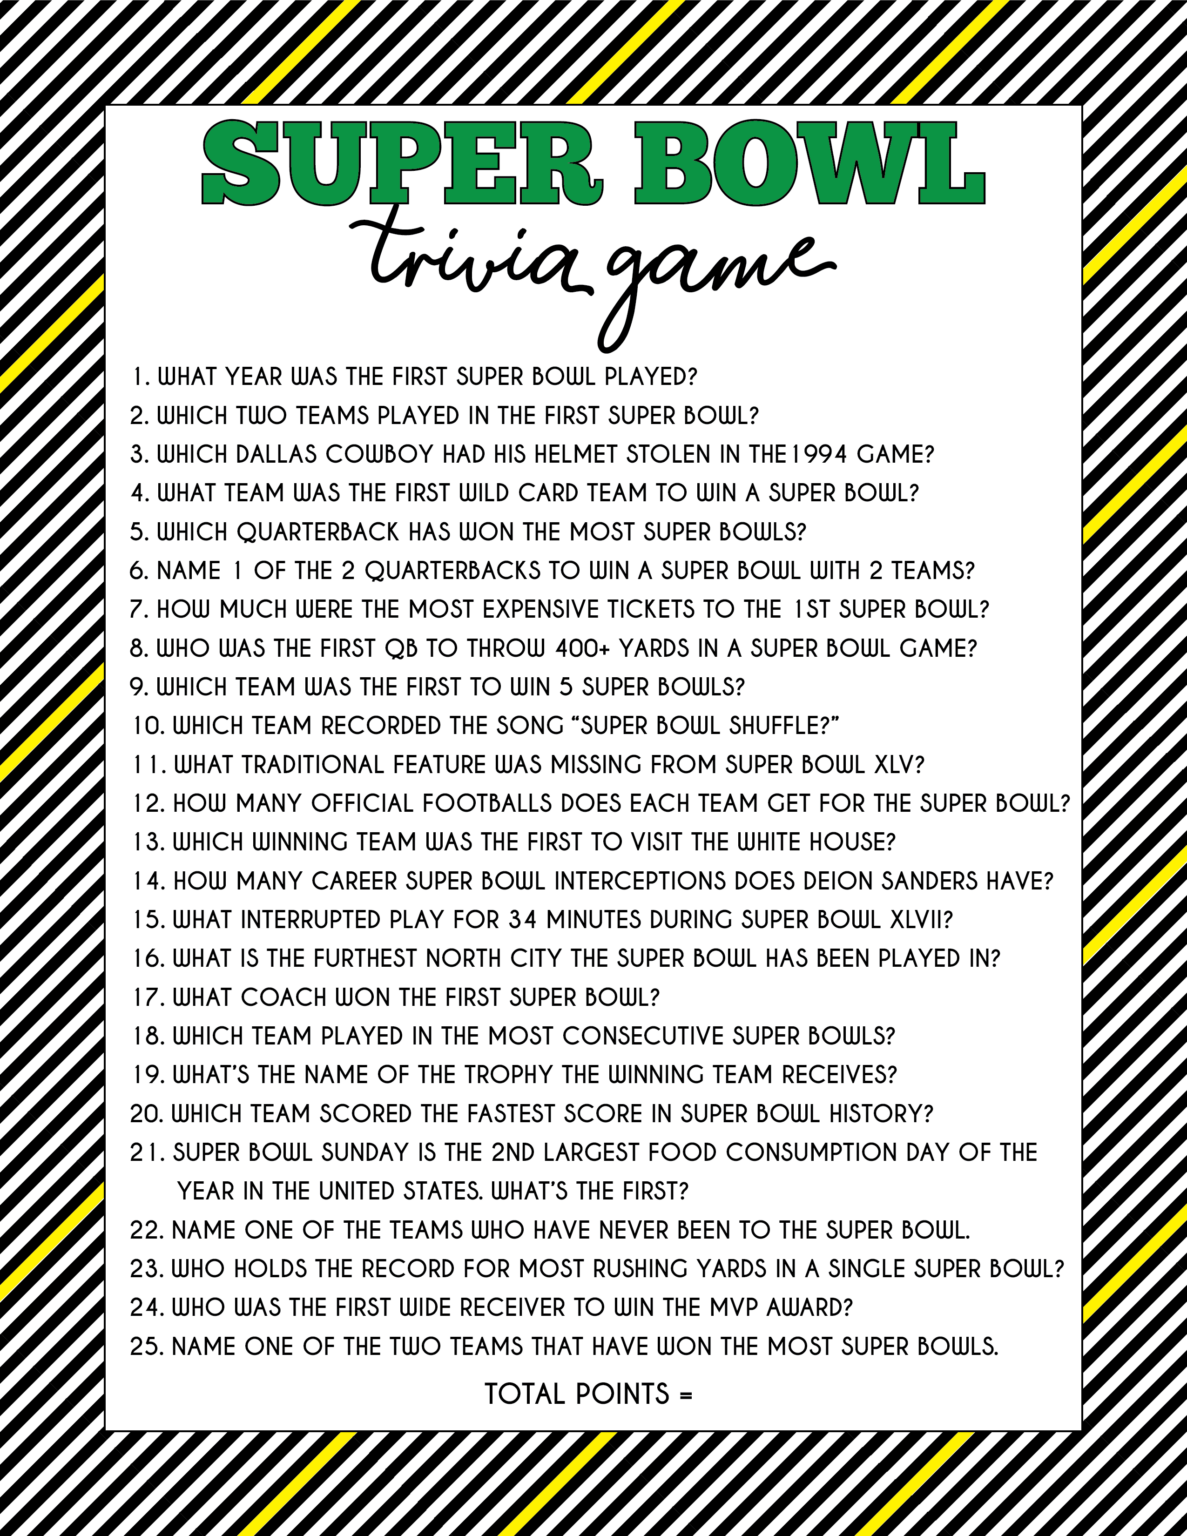 Free Printable Super Bowl Trivia Questions Game Play Party Plan